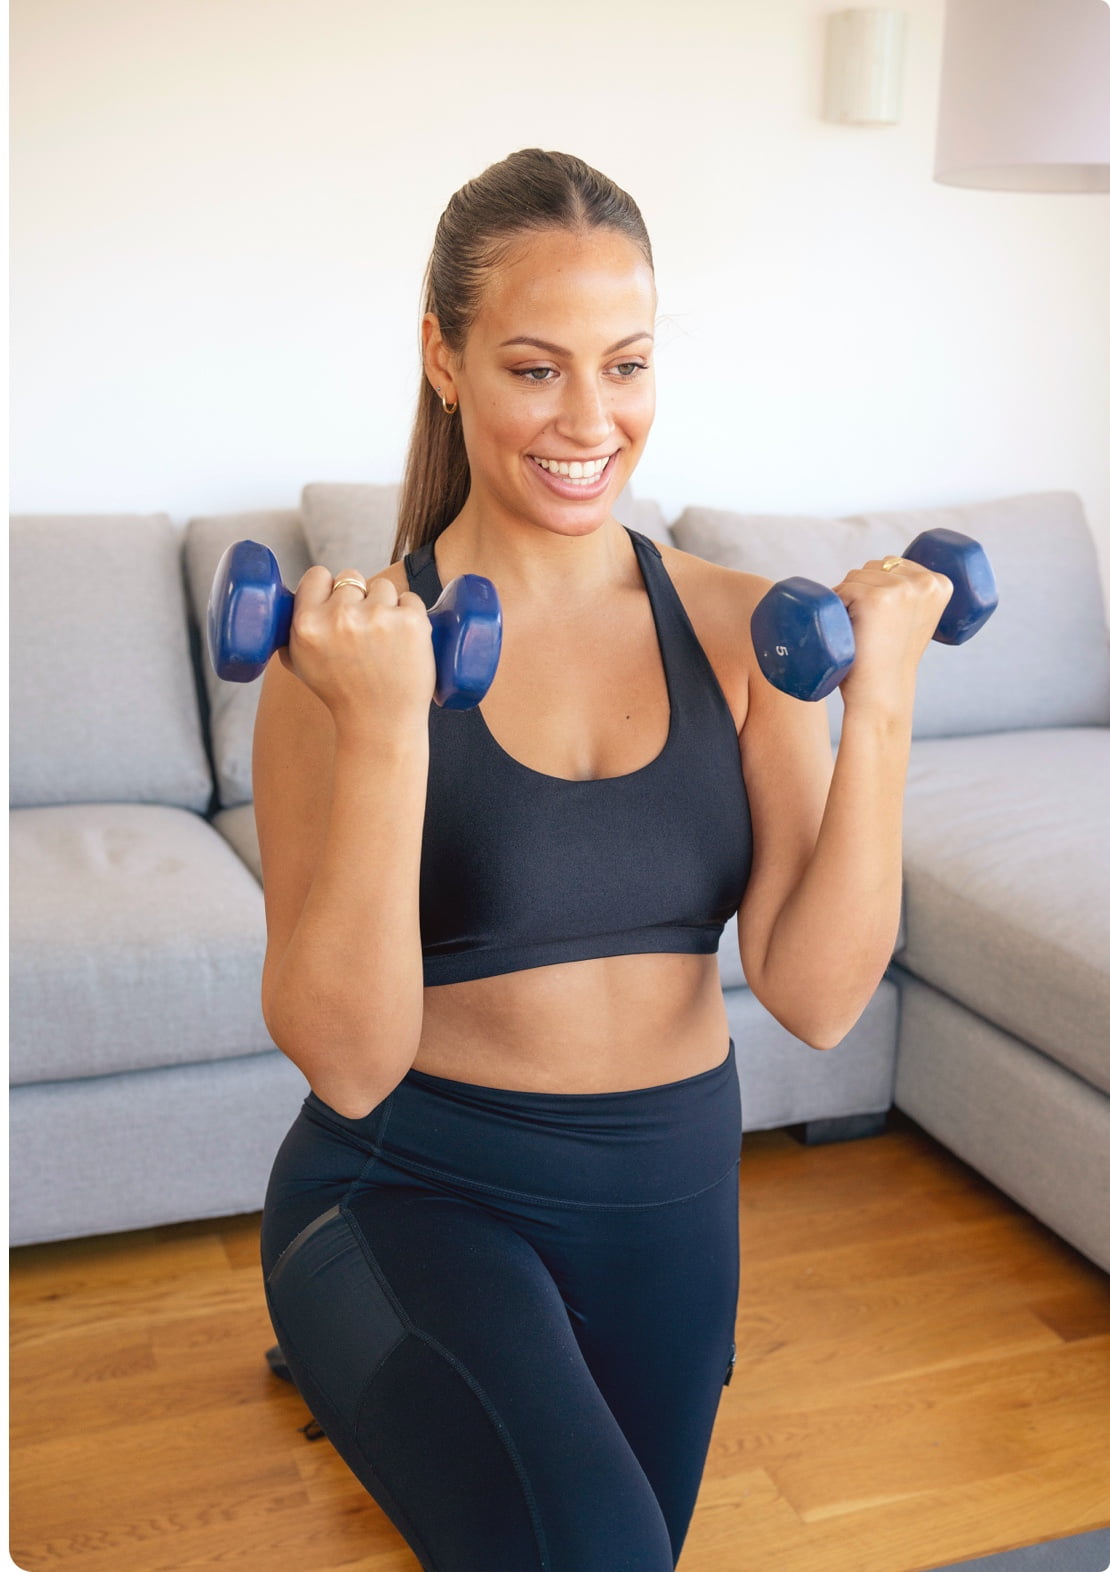 Smiling women exercising with dumbbells in her living room